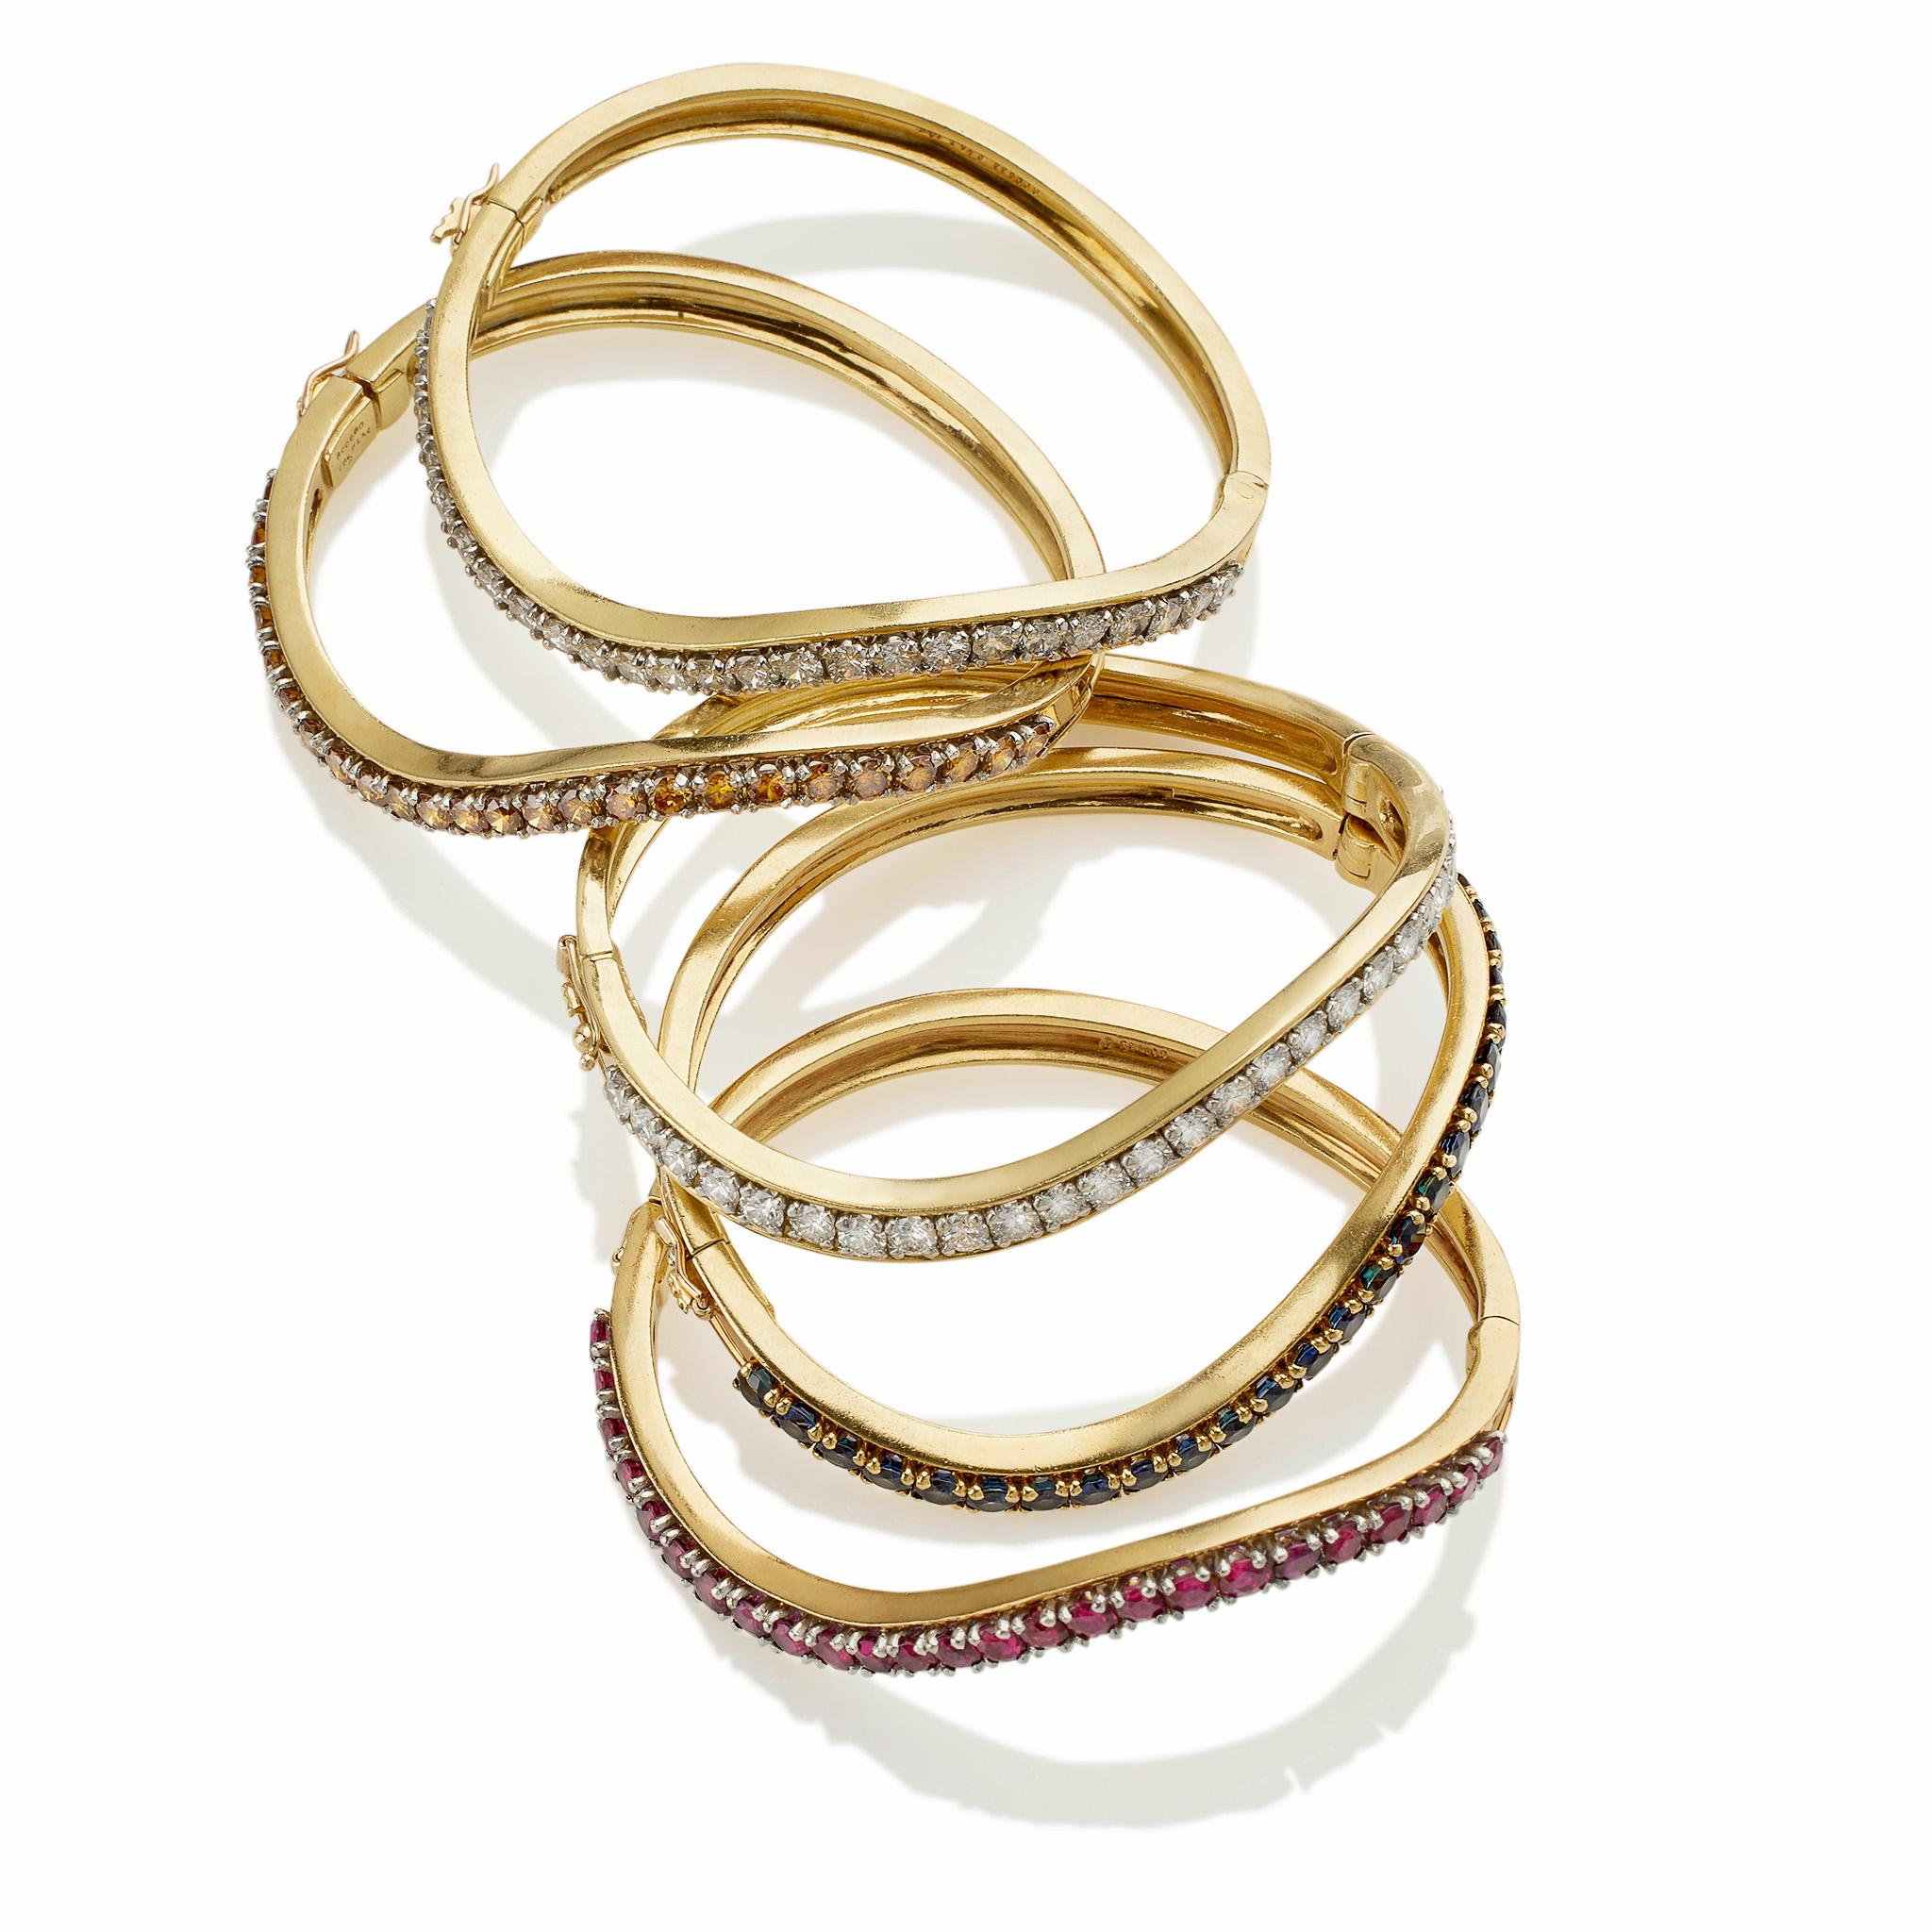 Five Diamond and Gem-set Oscar Heyman Bangle Bracelets In Excellent Condition For Sale In New York, NY